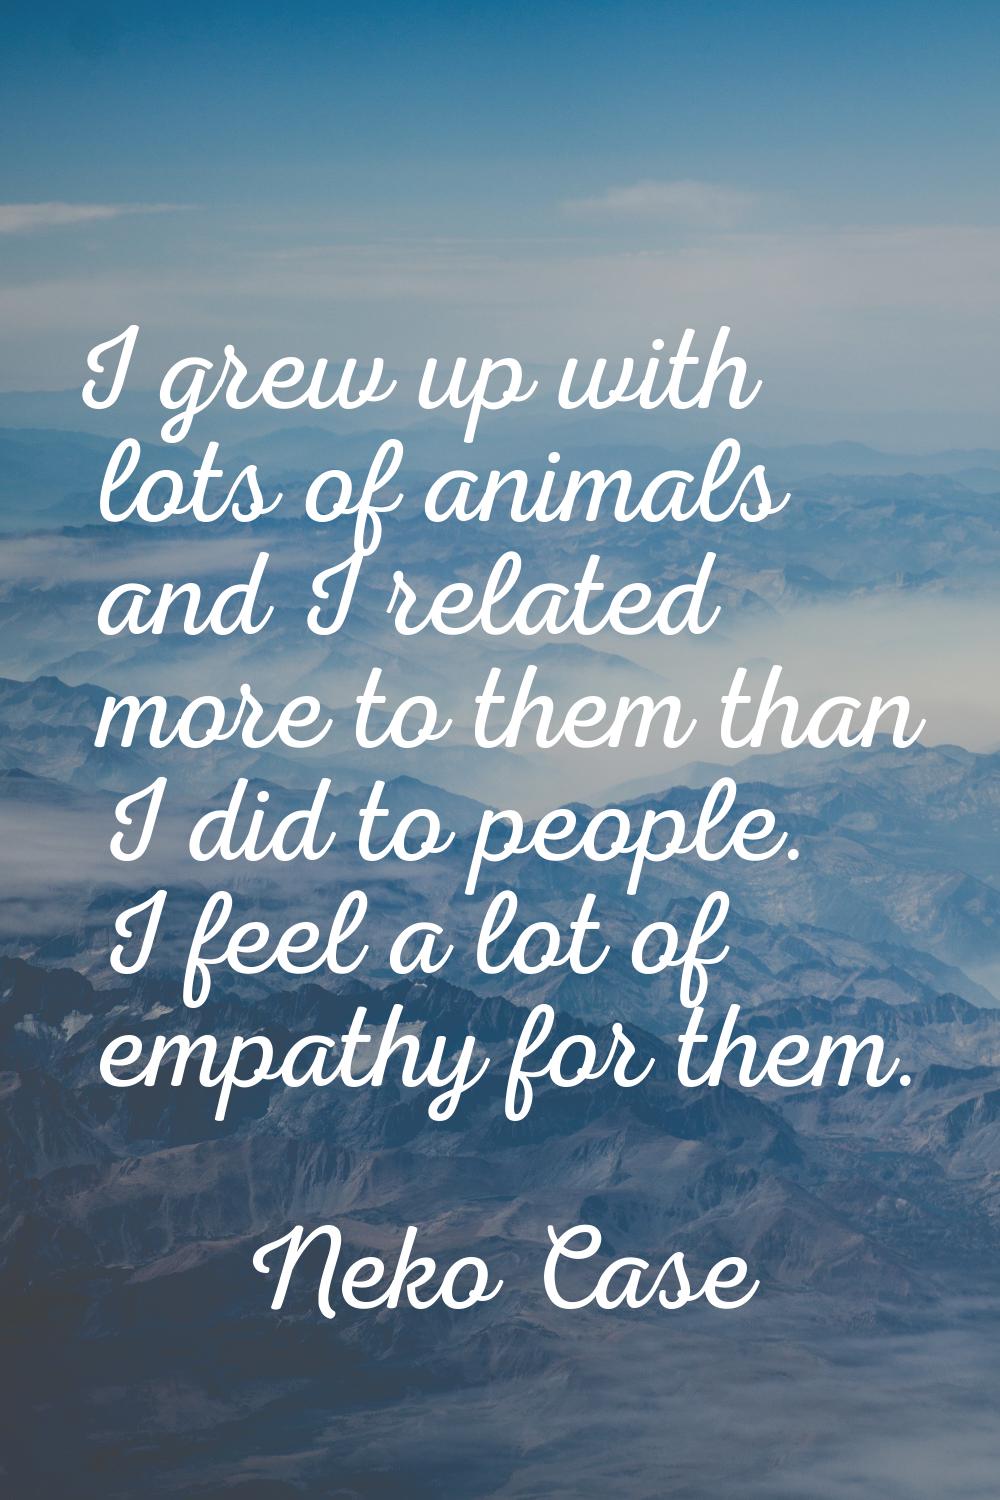 I grew up with lots of animals and I related more to them than I did to people. I feel a lot of emp